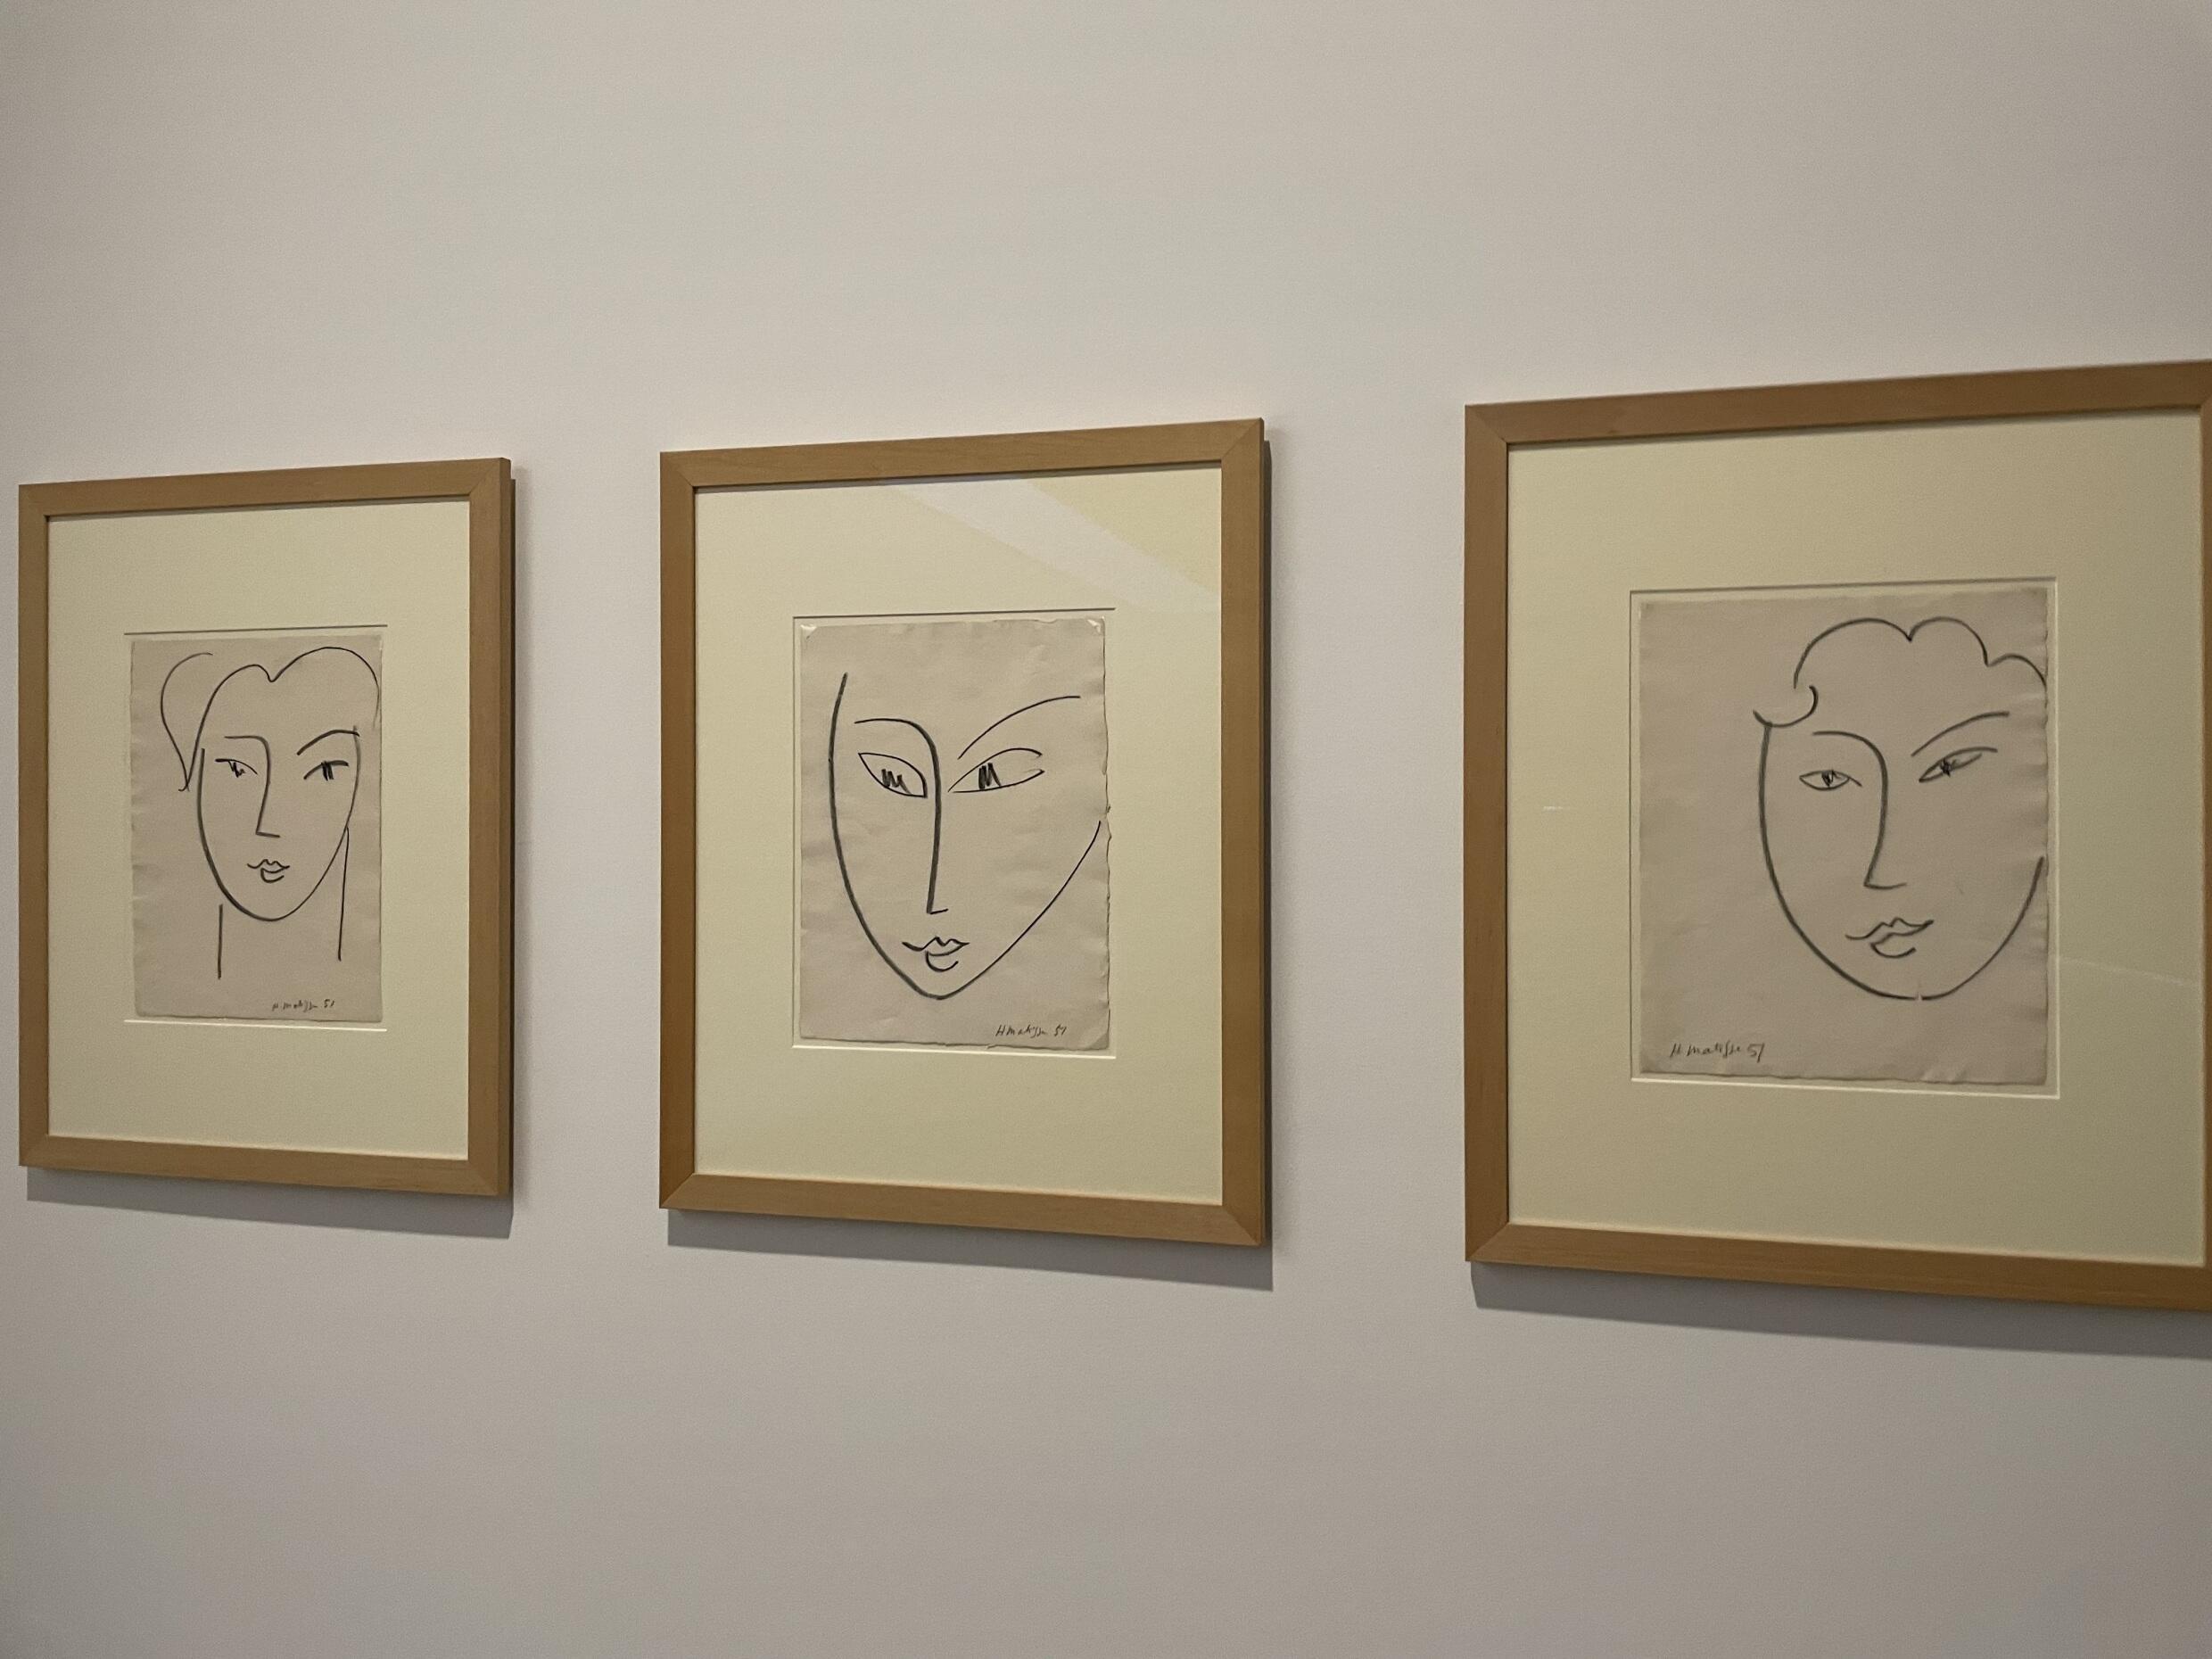 The works are presented on 2000 m2 of space and in 10 sections, following the chronology of Matisse's life and work.